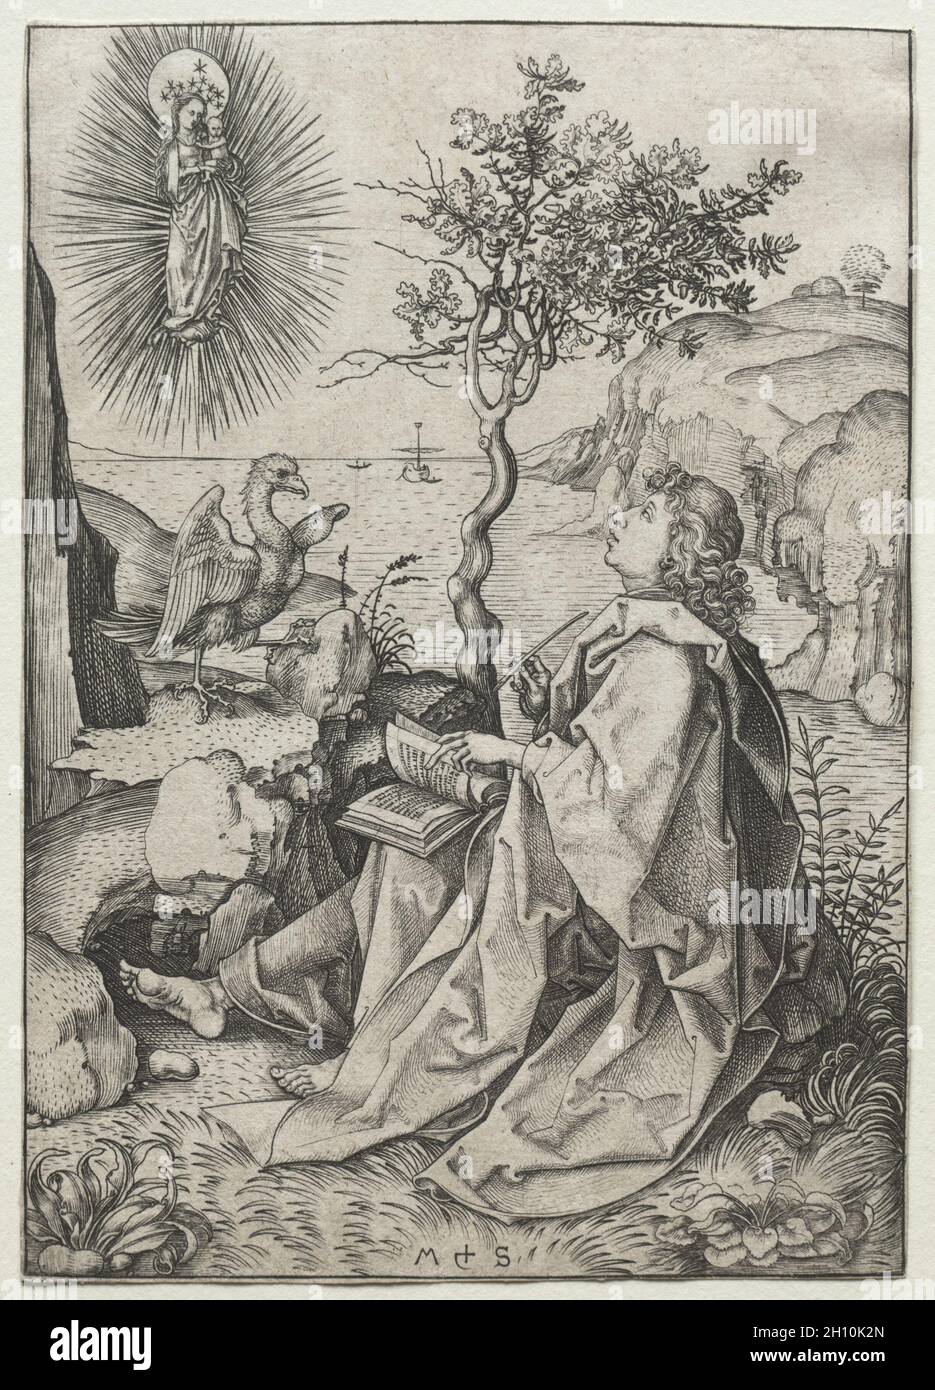 St. John the Evangelist on the Isle of Patmos, 1475-80. Martin Schongauer (German, c.1450-1491). Engraving; image: 16 x 11.3 cm (6 5/16 x 4 7/16 in.); sheet: 16 x 11.3 cm (6 5/16 x 4 7/16 in.). Stock Photo